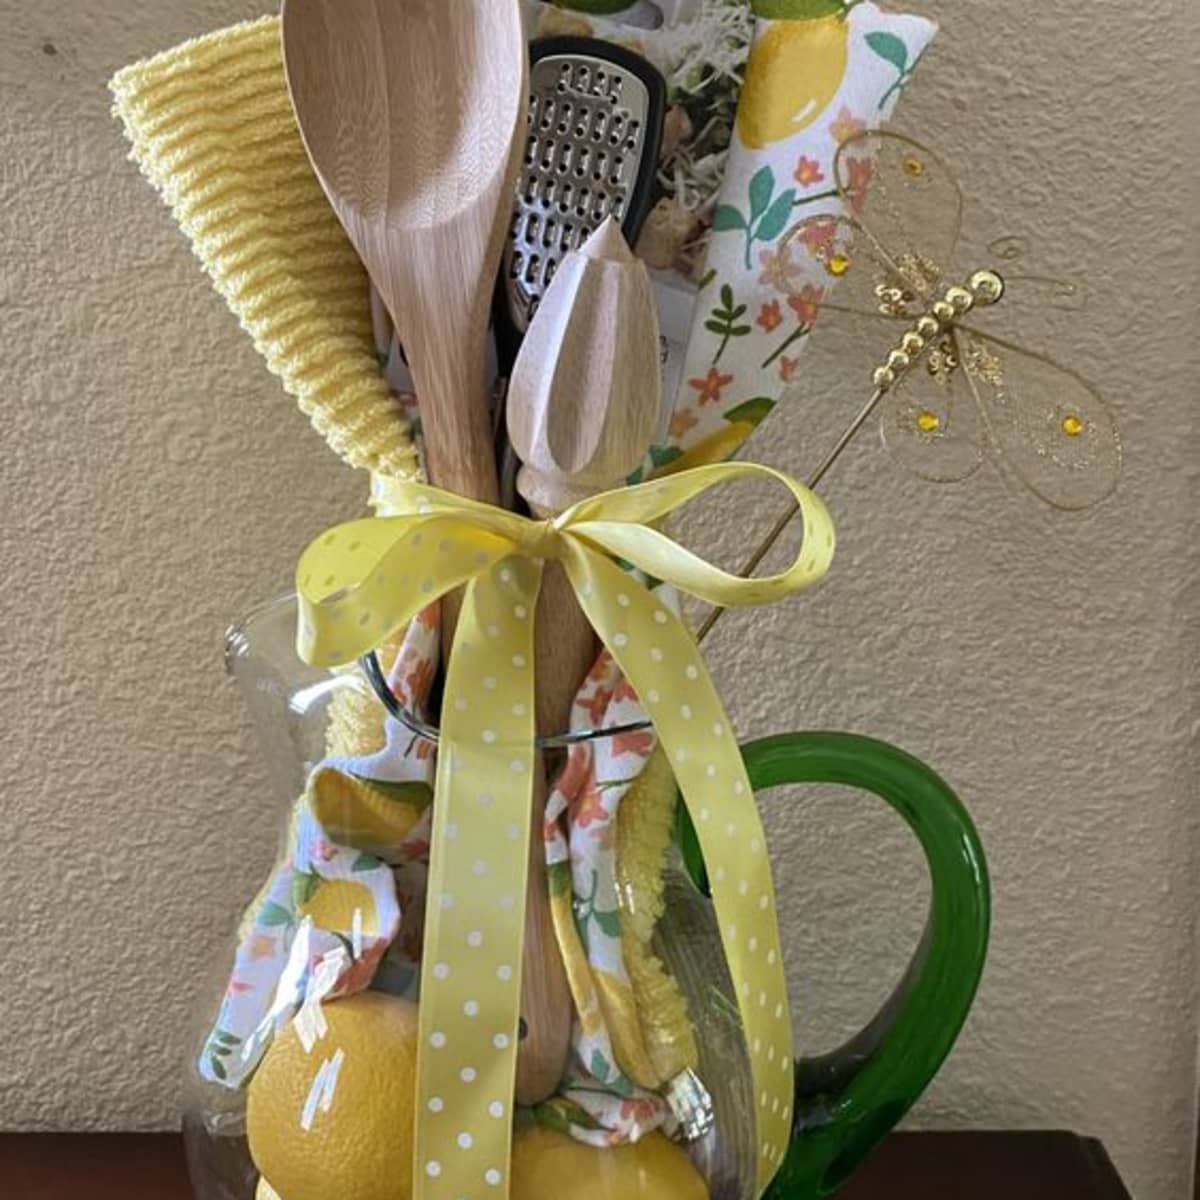 CHOCOLATE LOVERS' BASKET Gift Basket in Mcallen, TX - Floral & Craft  Expressions